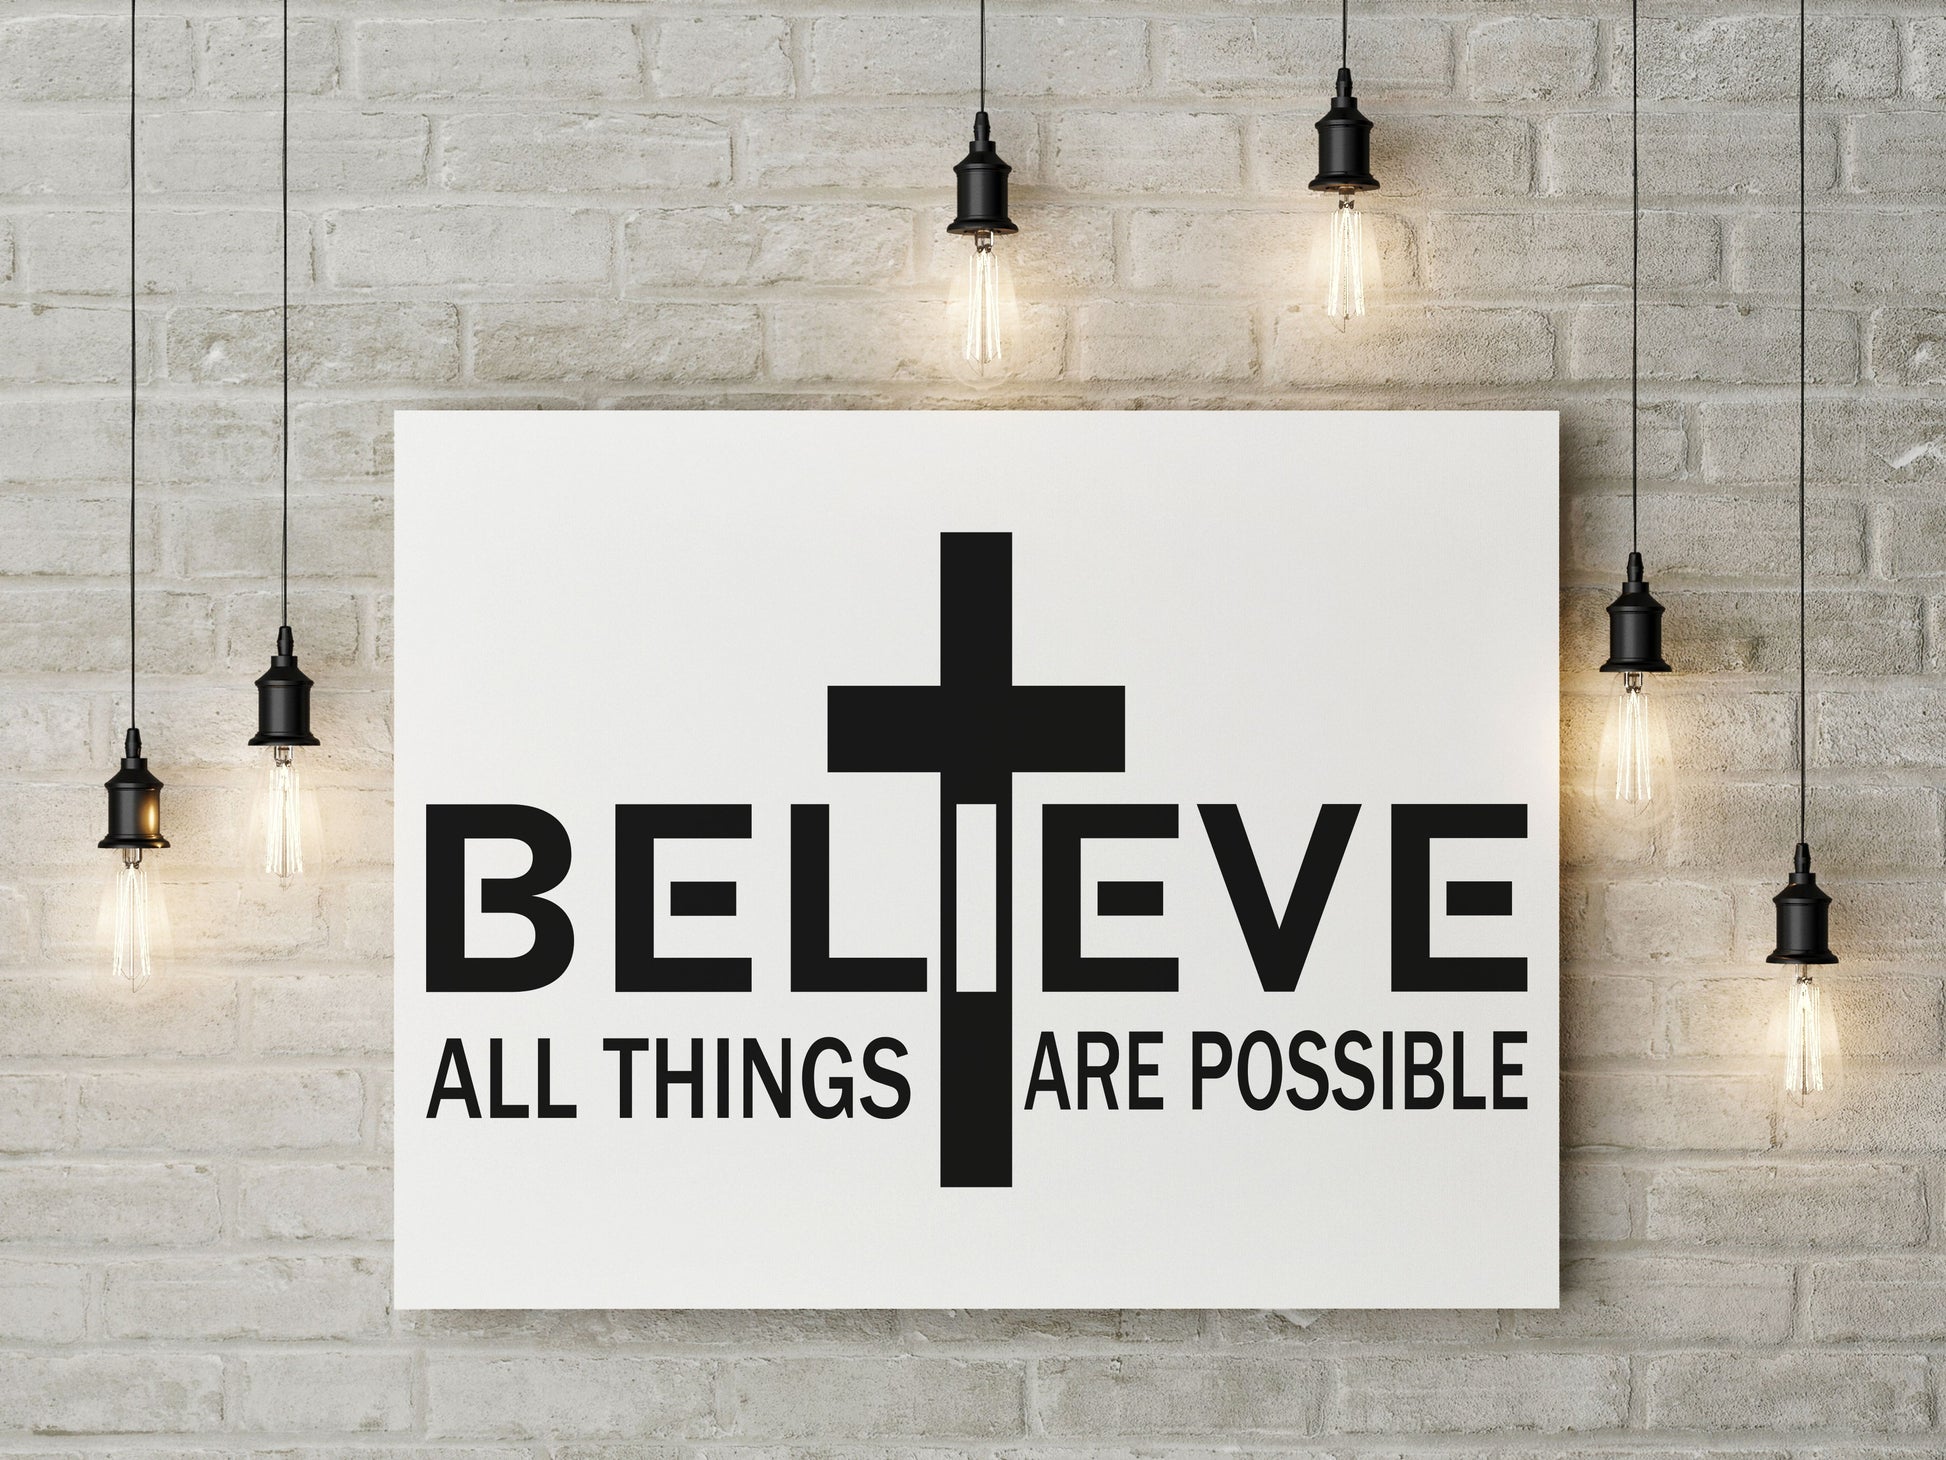 Inspiring "Believe All Things Are Possible" Canvas Print - USTAD HOME